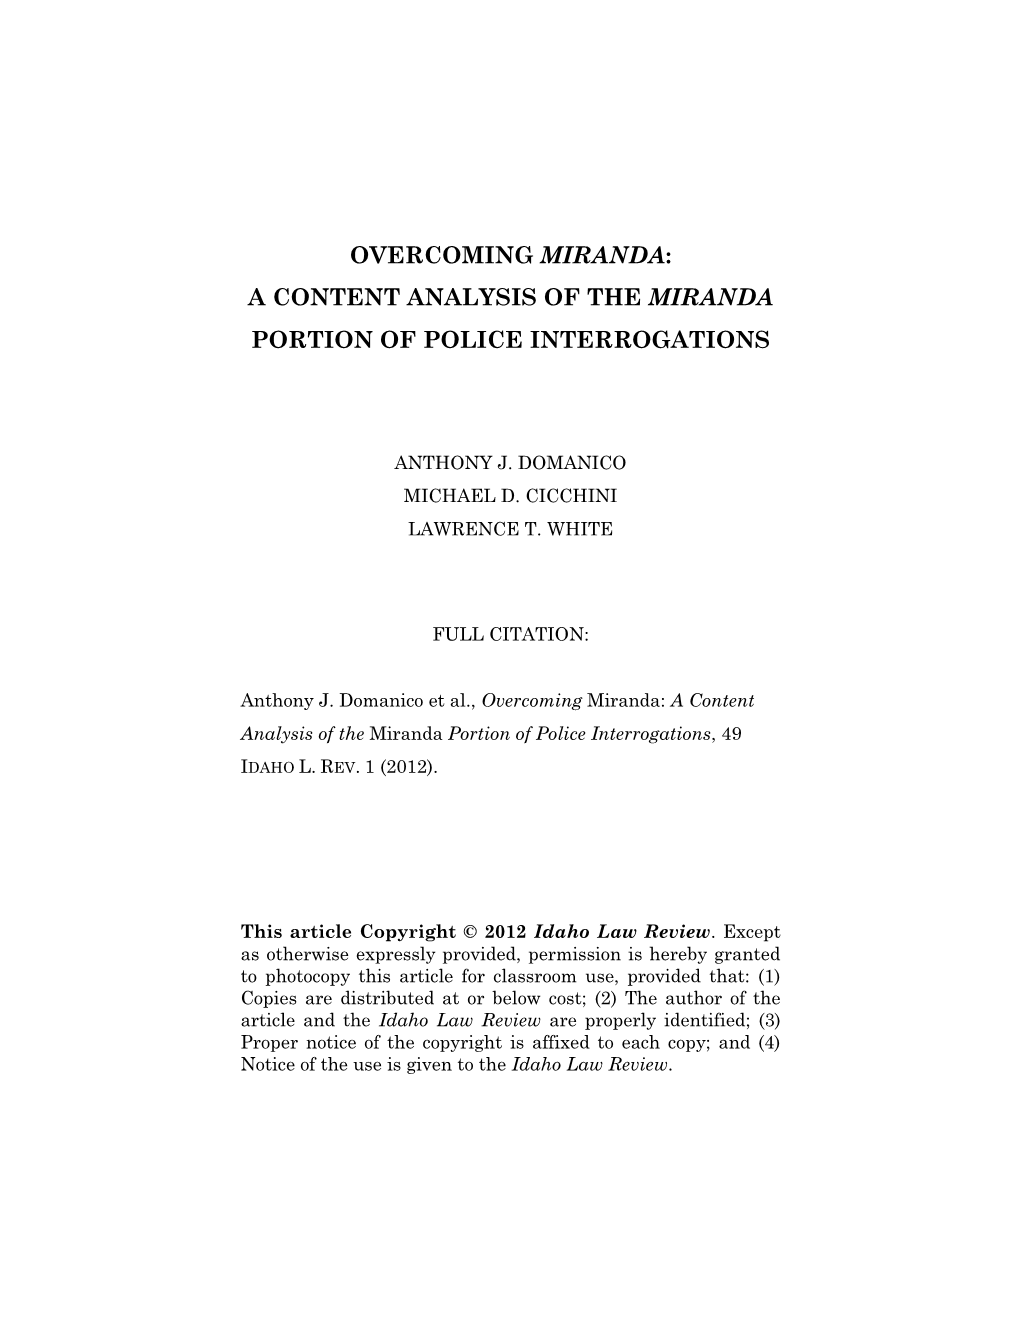 A Content Analysis of the Miranda Portion of Police Interrogations